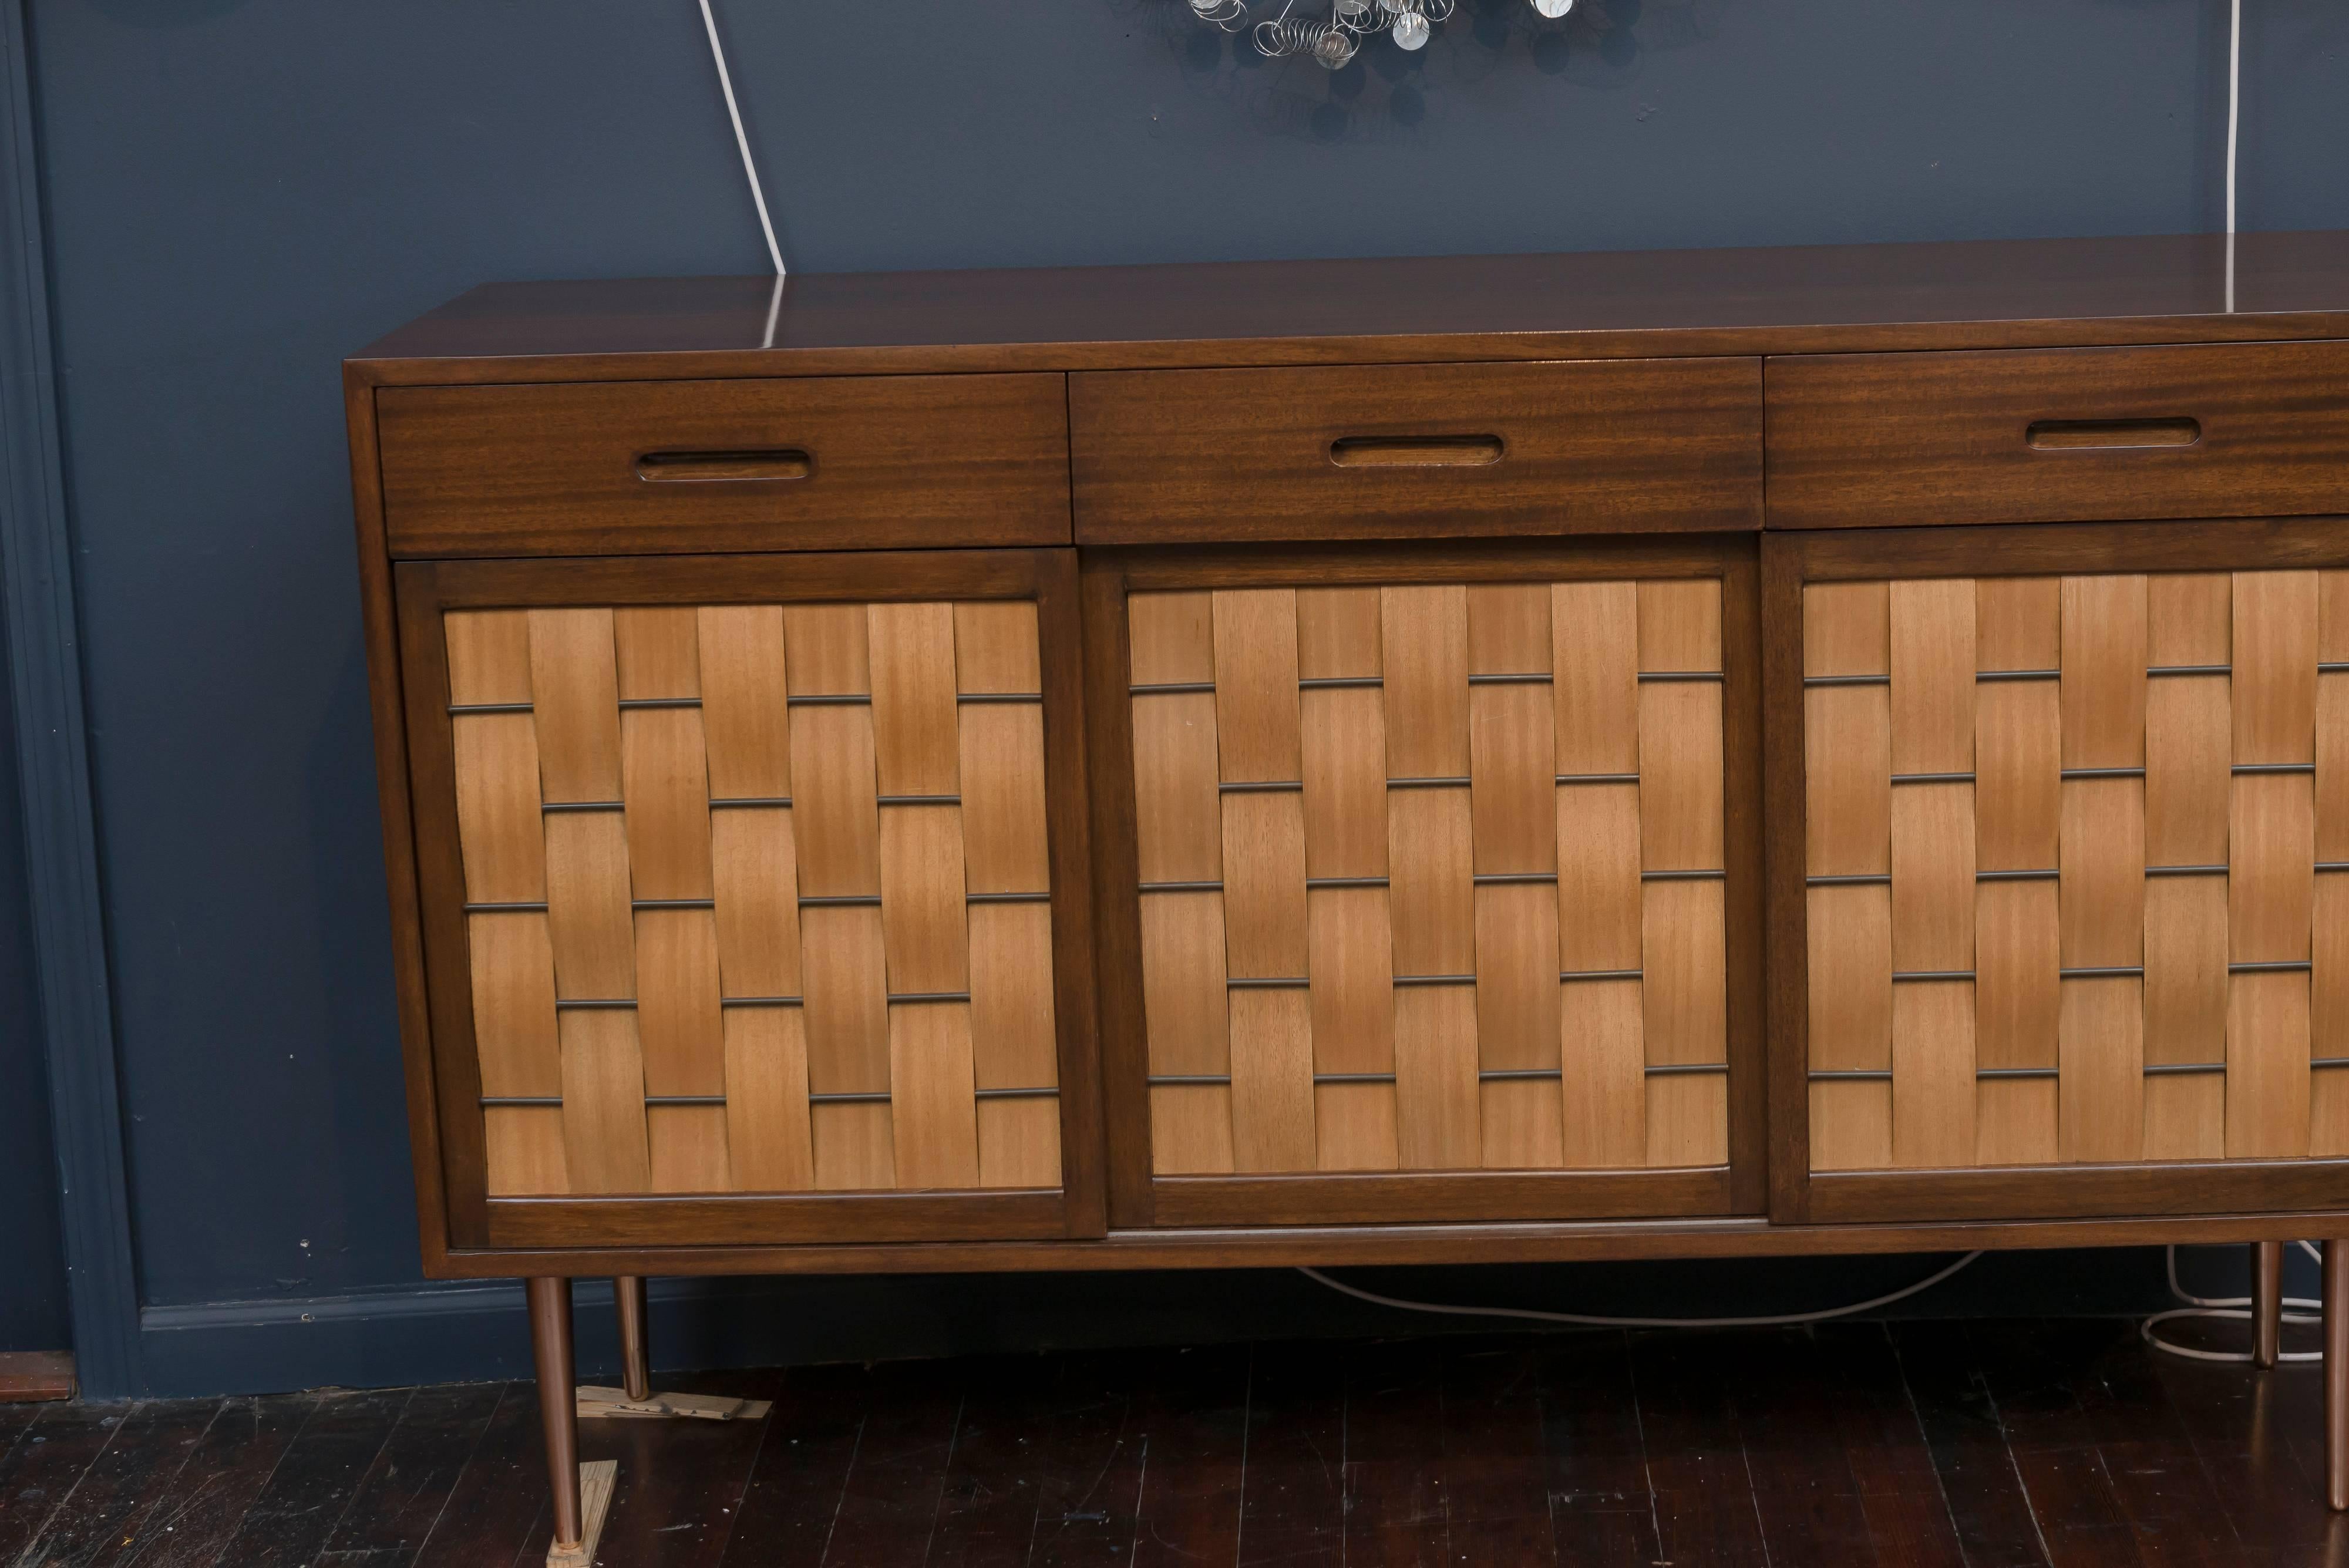 Elegant design by Edward Wormley for Dunbar Furniture Company, Berne Indiana. Perfectly refinished mahogany case with three top drawers and sliding woven front doors on tapering polished legs. Fitted interior comprises six drawers and two adjustable